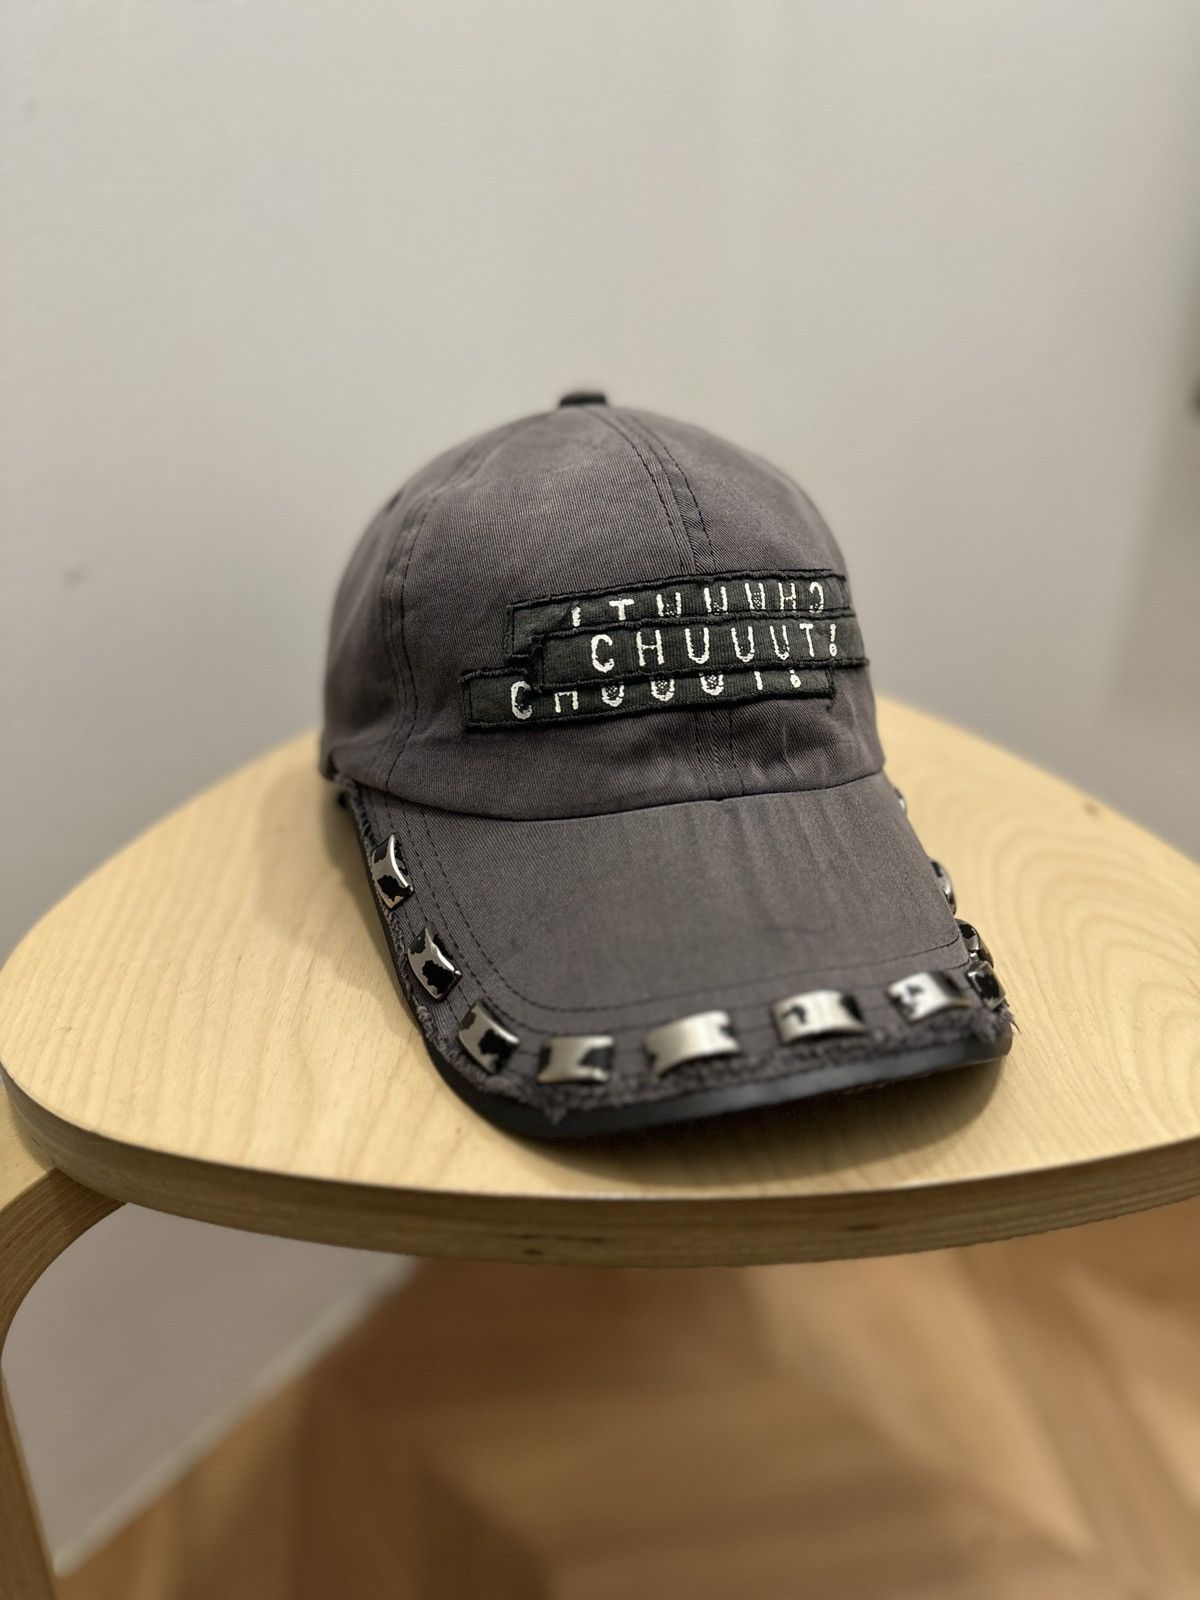 Undercover Undercover SS06 “T” Chuuut Hat | Grailed